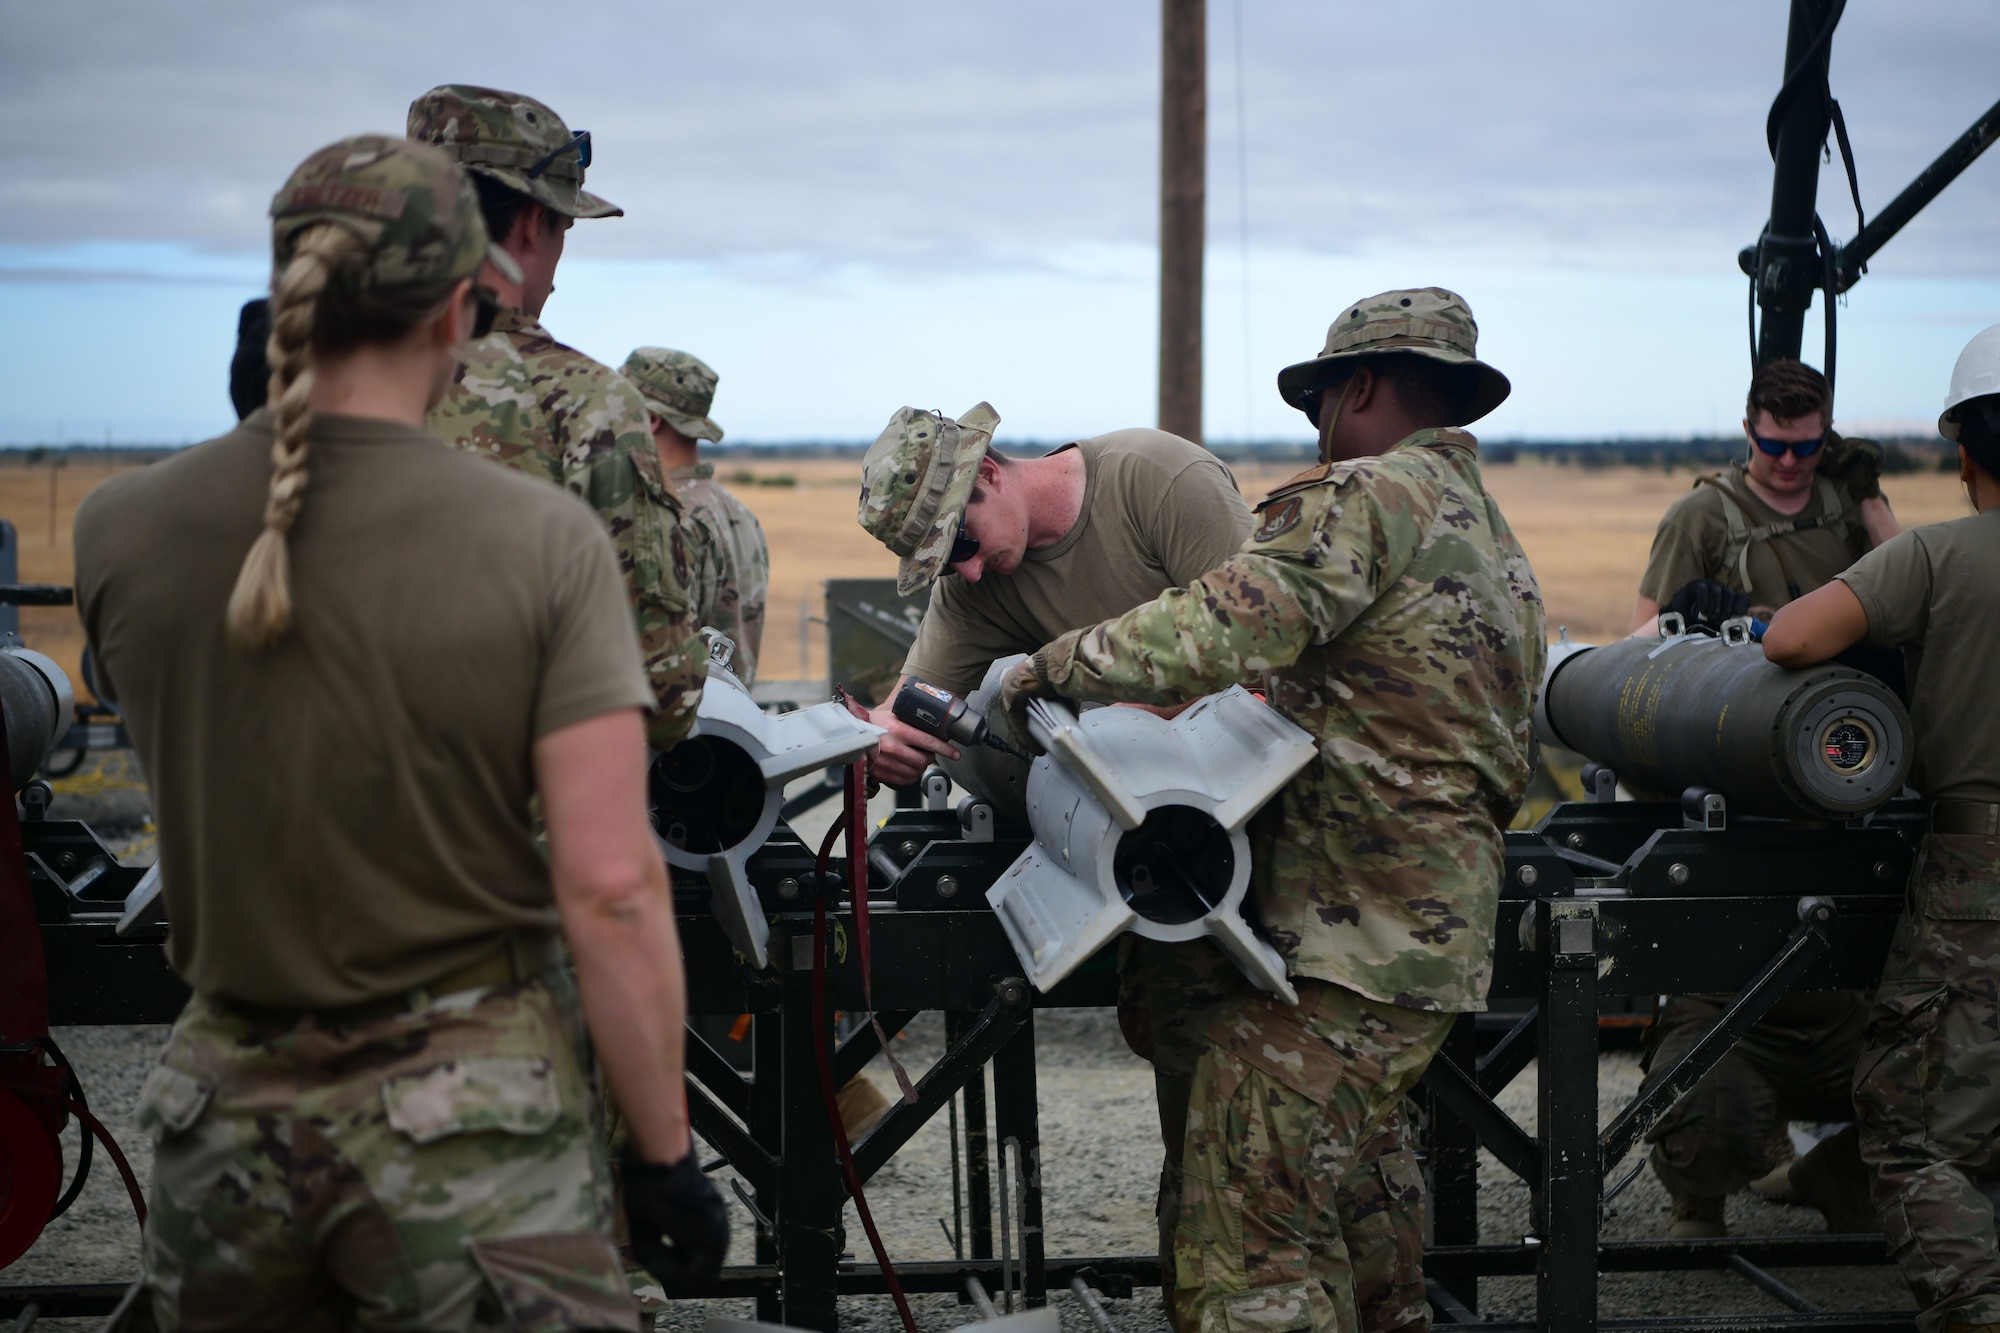 A group of 9th Munitions Squadron Airmen construct bombs during the senior officer orientation (SOO) course on Beale Air Force Base, California on Sept. 25, 2023.